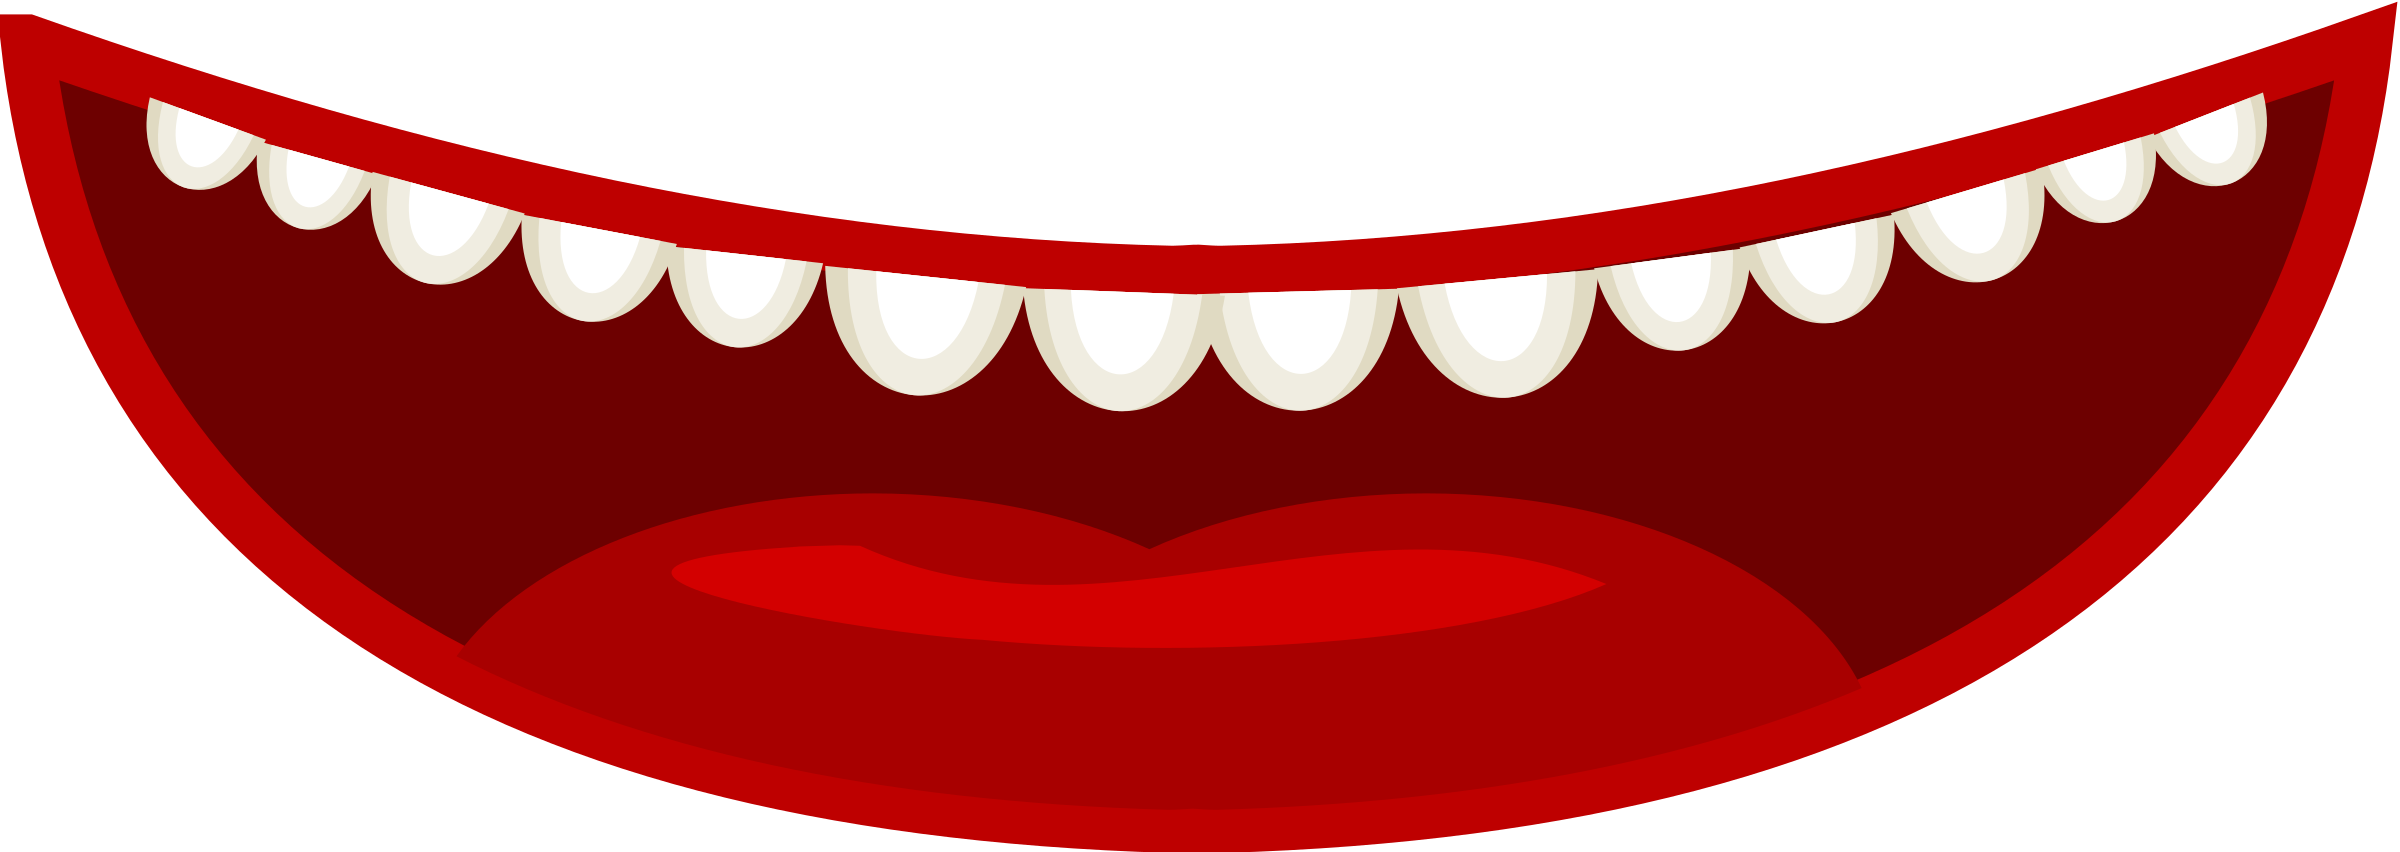 Clipart mouth mouth expression. Smile png image purepng